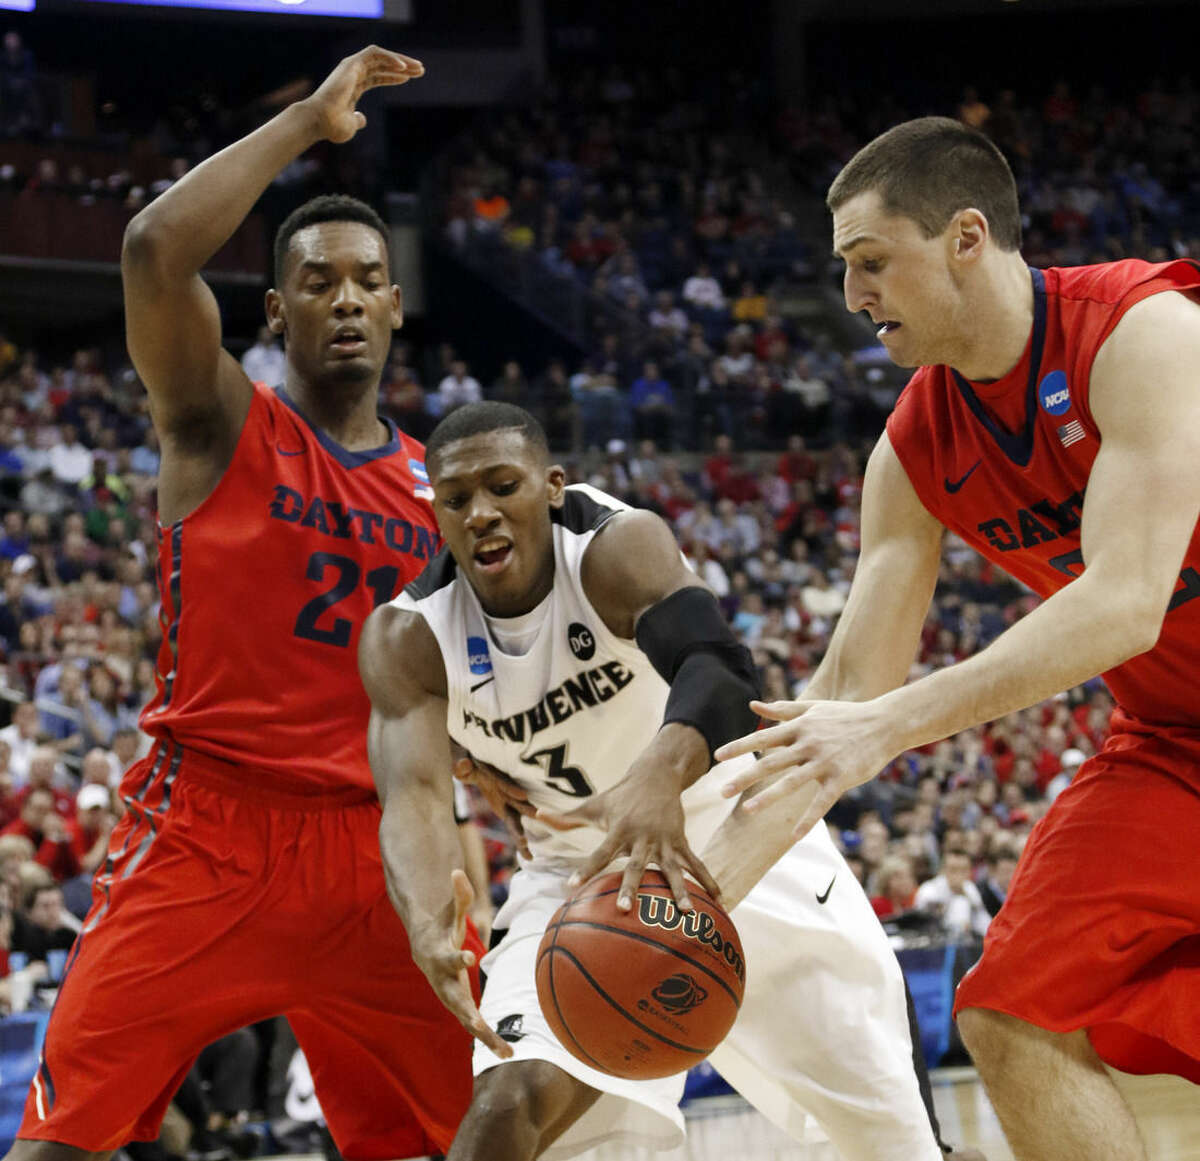 Providence's Kris Dunn (3) loses the ball against Dayton's Dyshawn Pierre, left, and Bobby Wehrli in the second half of an NCAA tournament college basketball game in the Round of 64 in Columbus, Ohio, Saturday, March 21, 2015. (AP Photo/Paul Vernon)